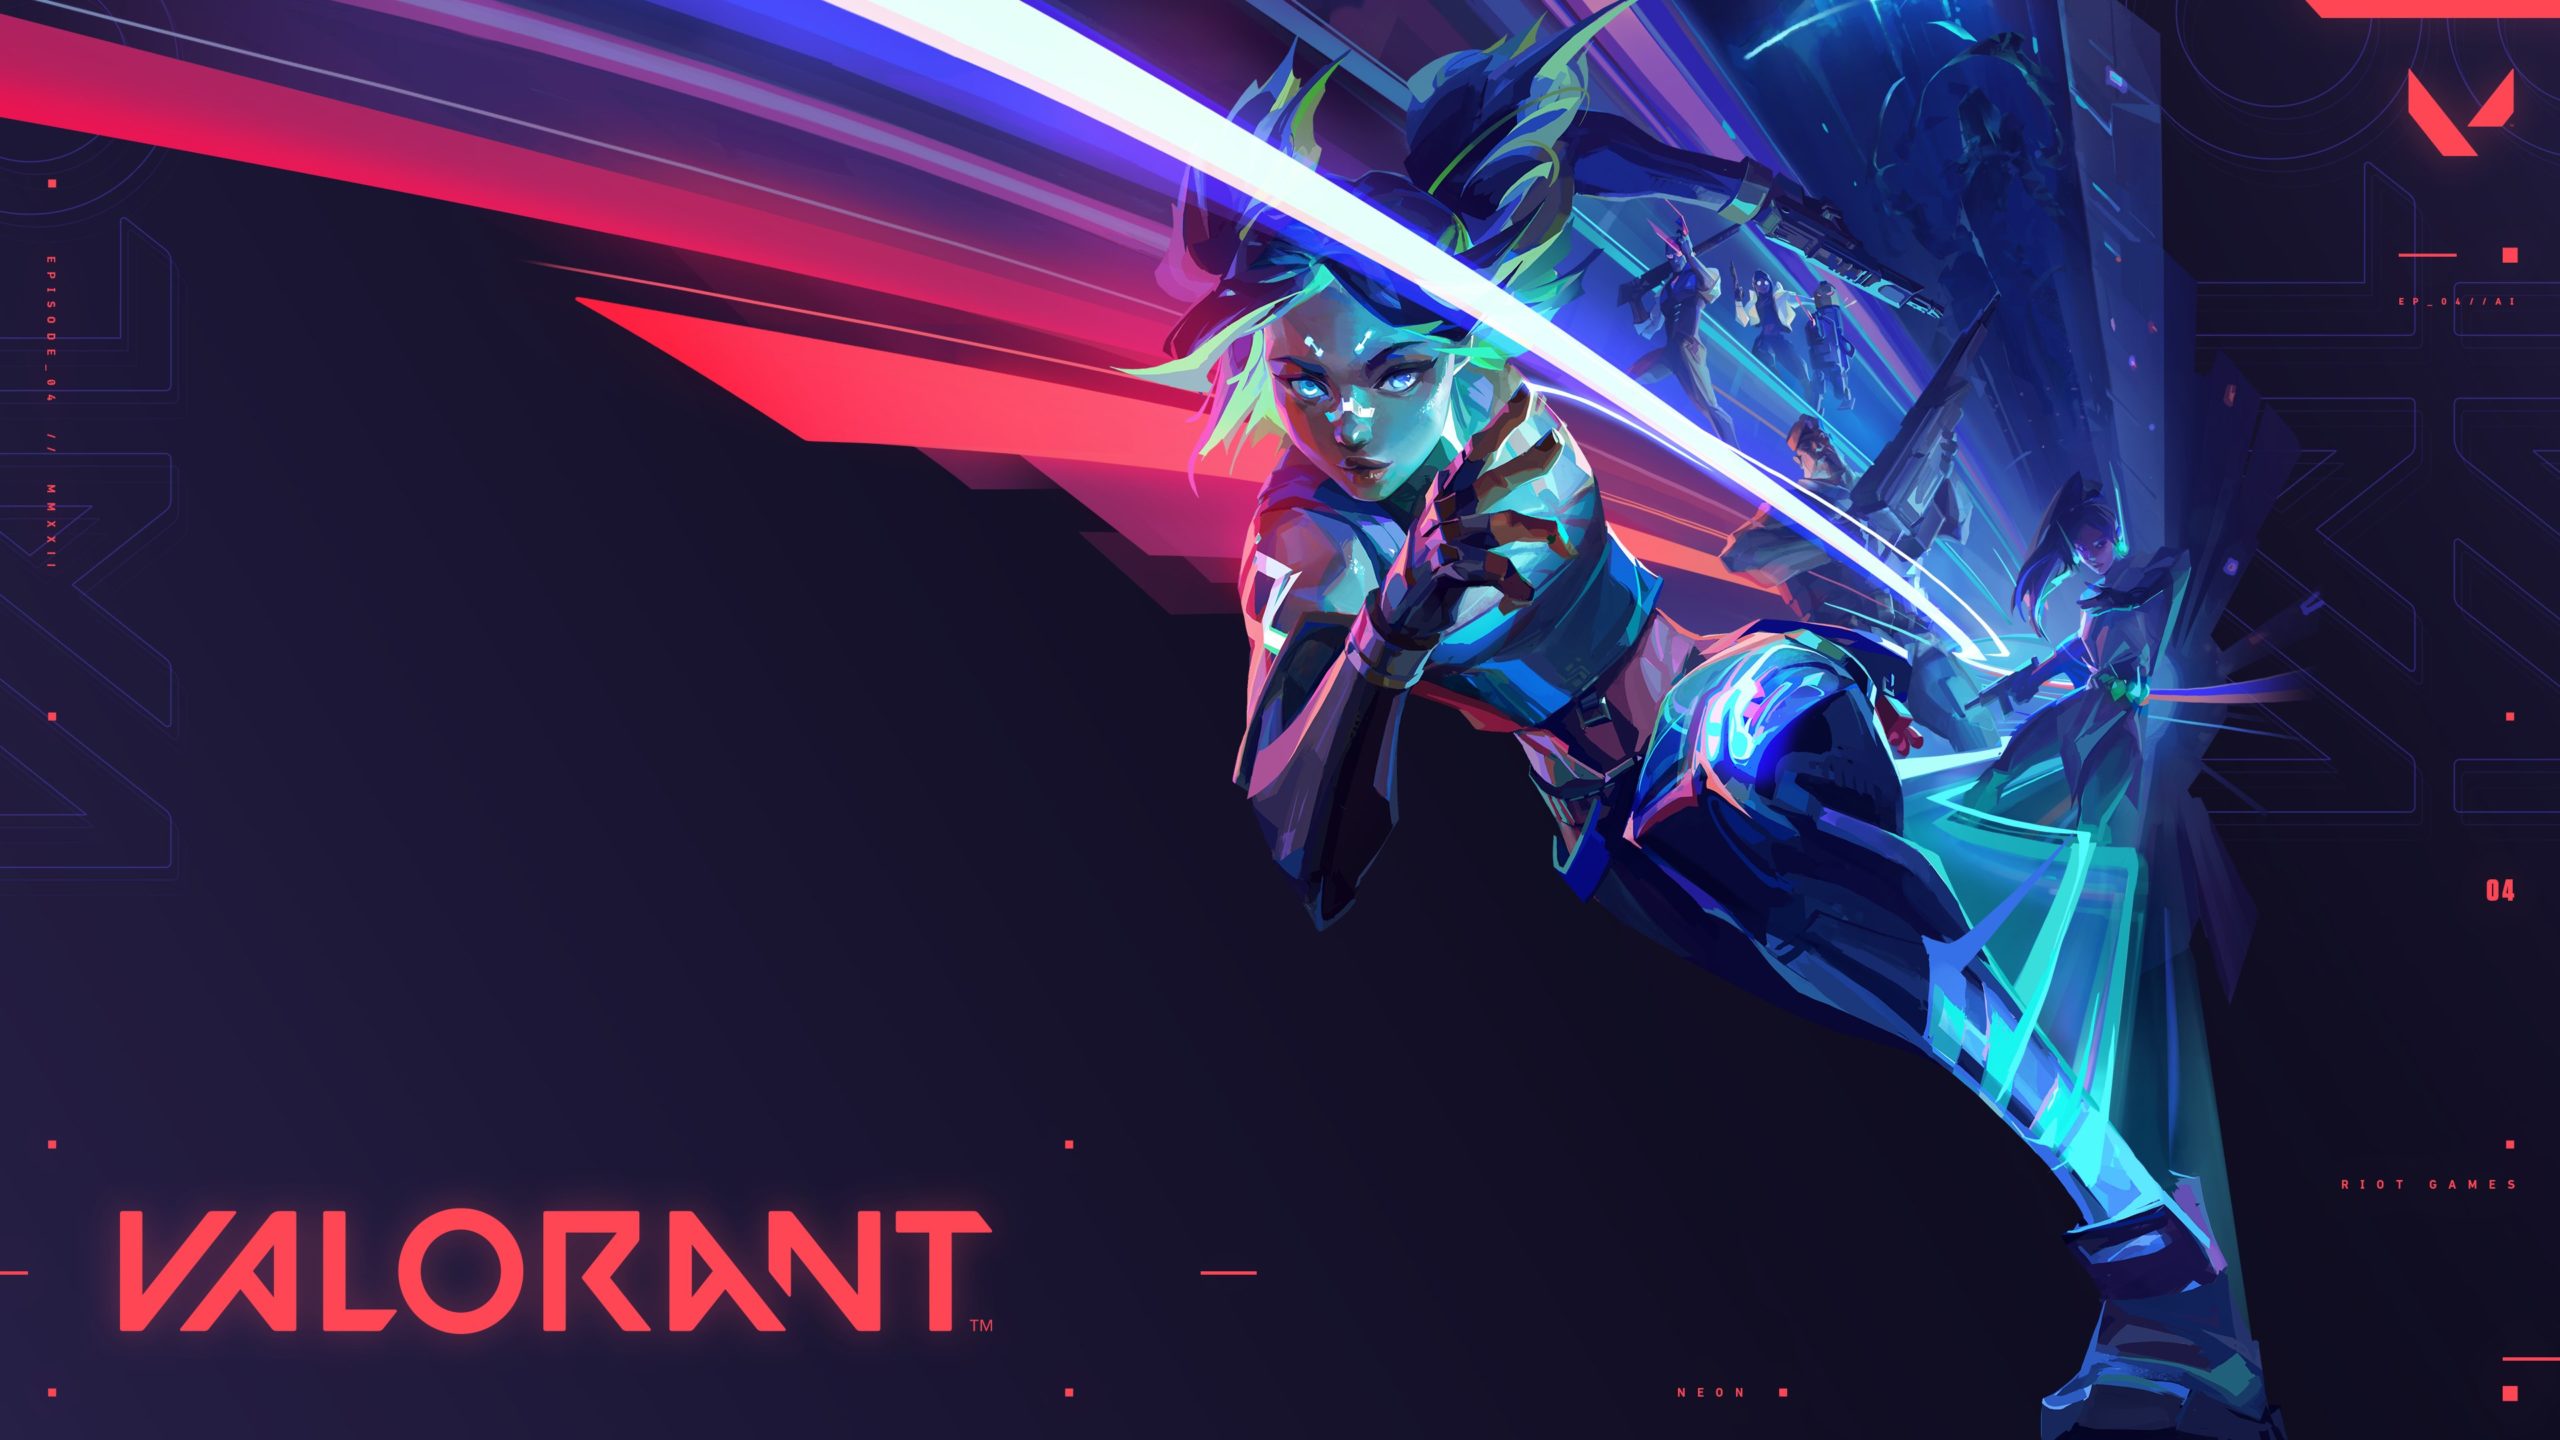 Valorant Episode 4 Act 1 Battlepass: Key Features and Highlights